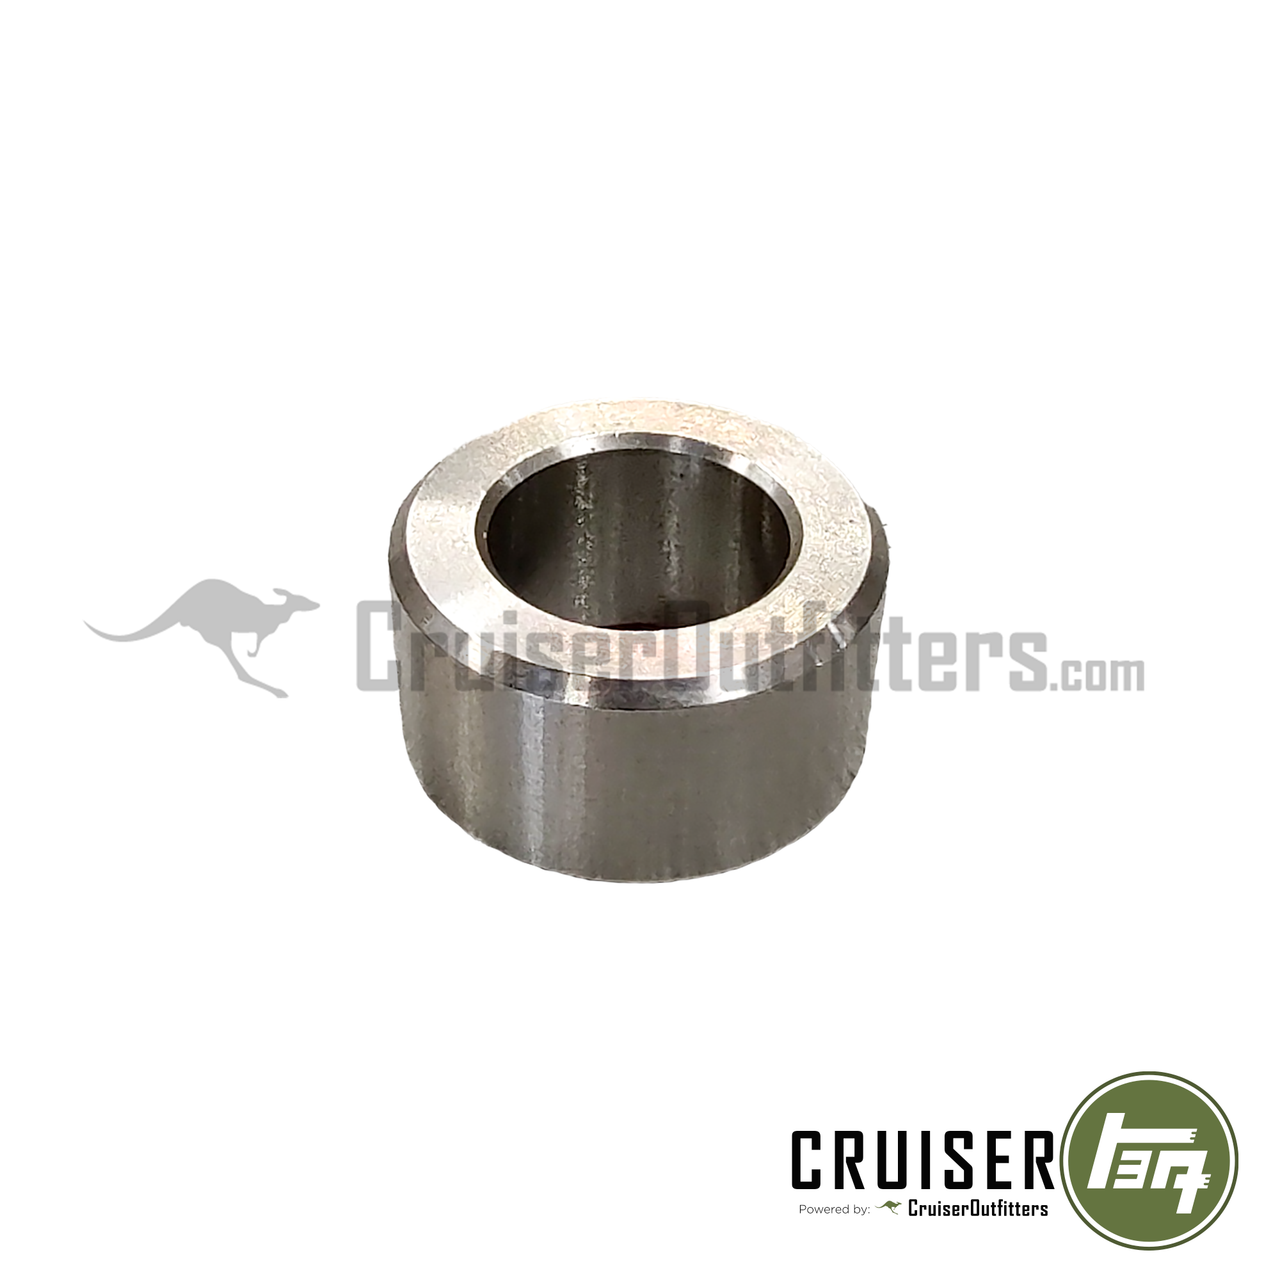 Center Bolt Spacer - Stainless Steel - Fits 6x/7x Applications (CROUTSSCBS)